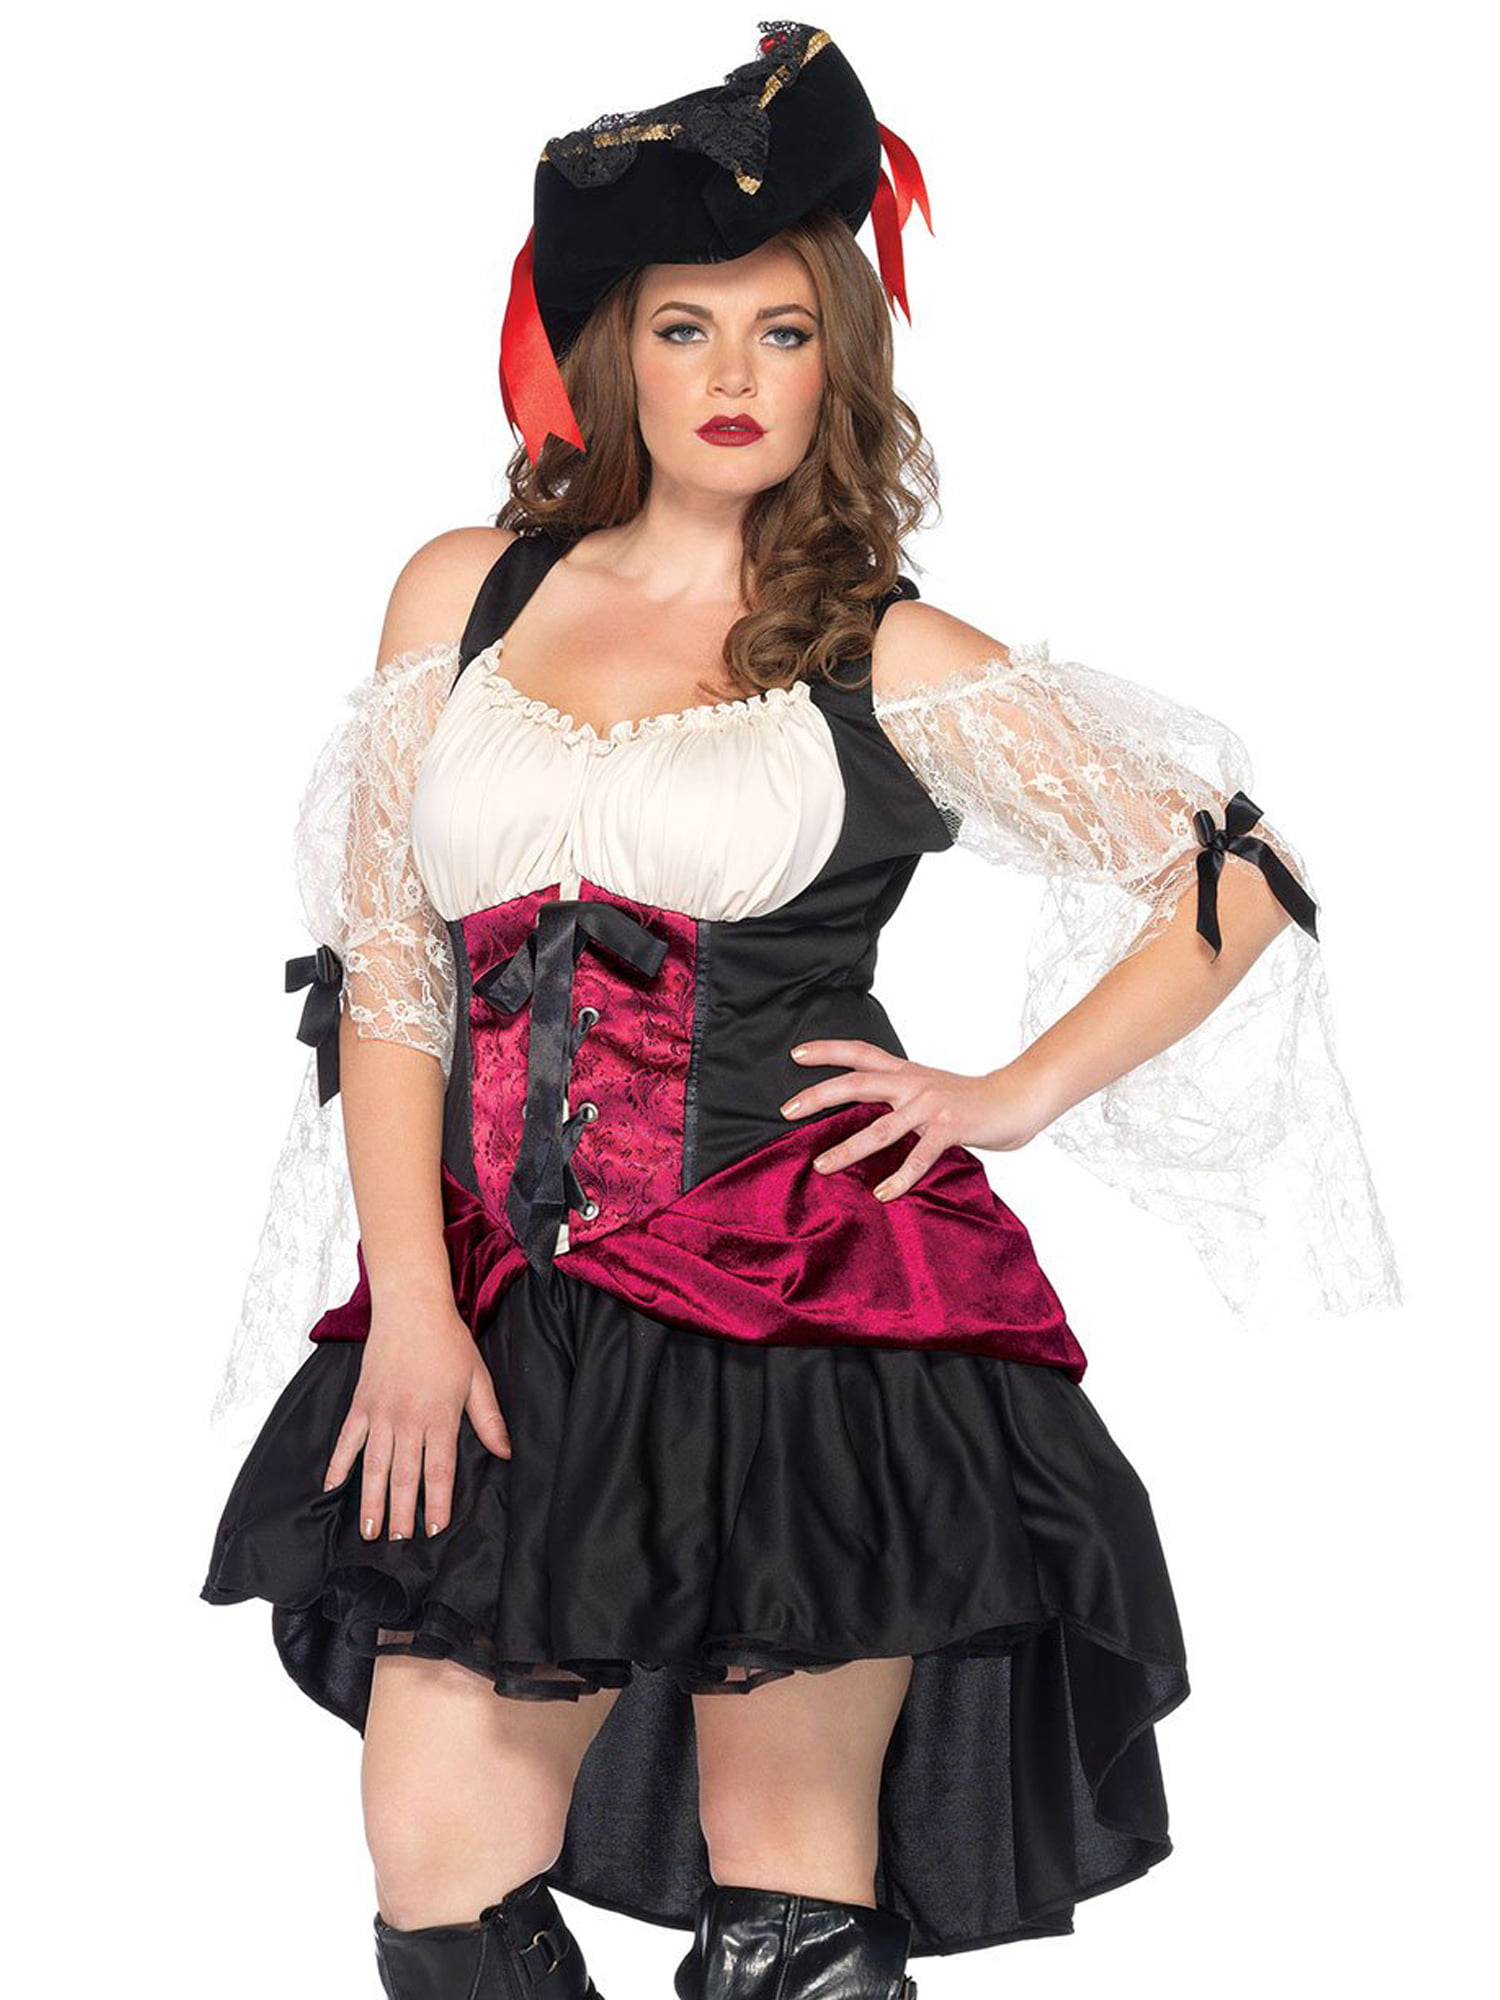 Sexy Pirate Costumes, Adult Pirate Costumes, Women's Pirate Halloween Costumes